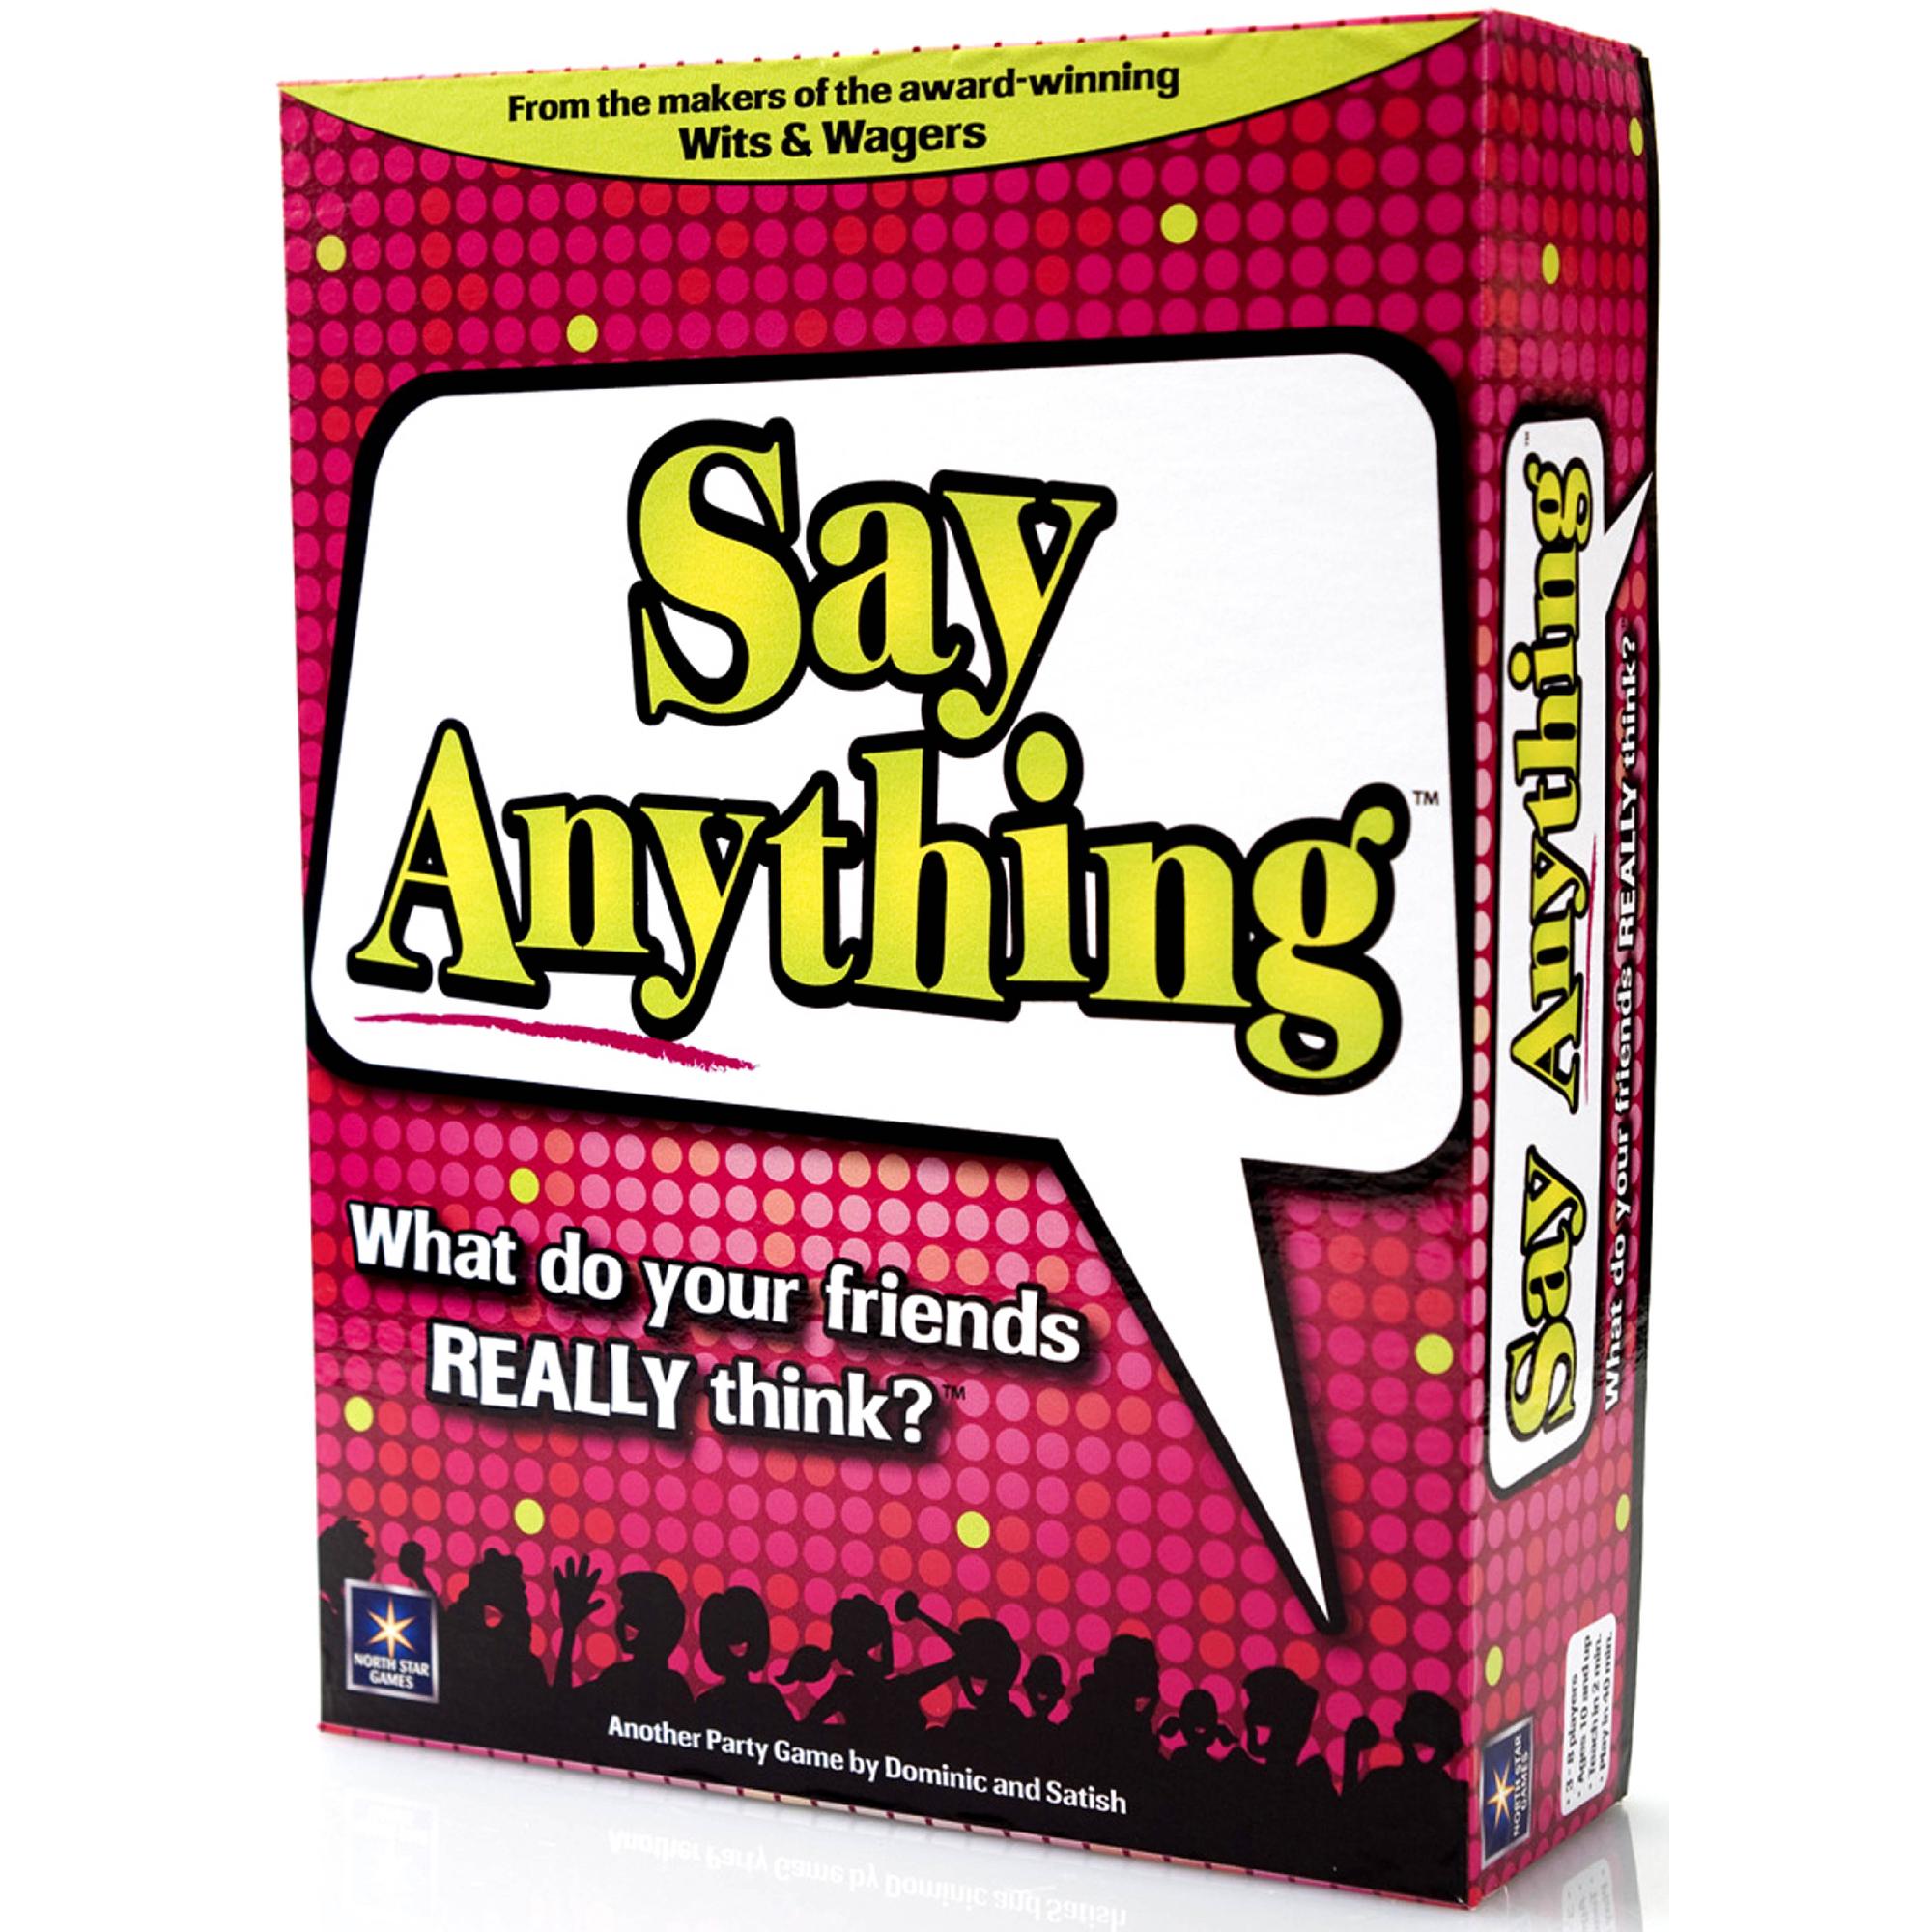 Where To Buy Say Anything Board Game